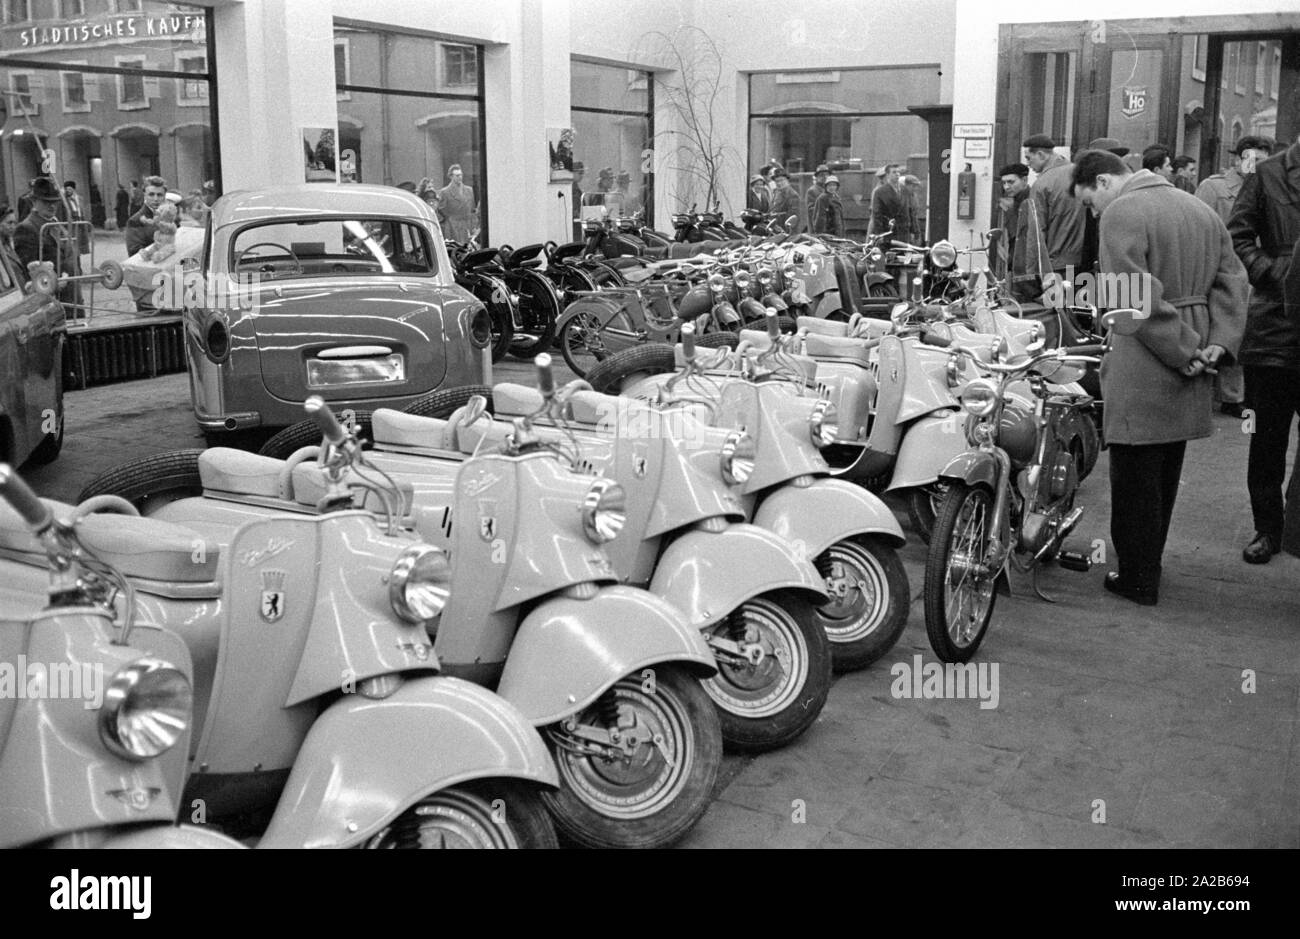 The city during the Spring Fair 1960. A man in front of a row of vehicles  produced in the GDR. Front row: IWL SR59 Berlin scooter (Berliner Roller),  back row: Simson SR